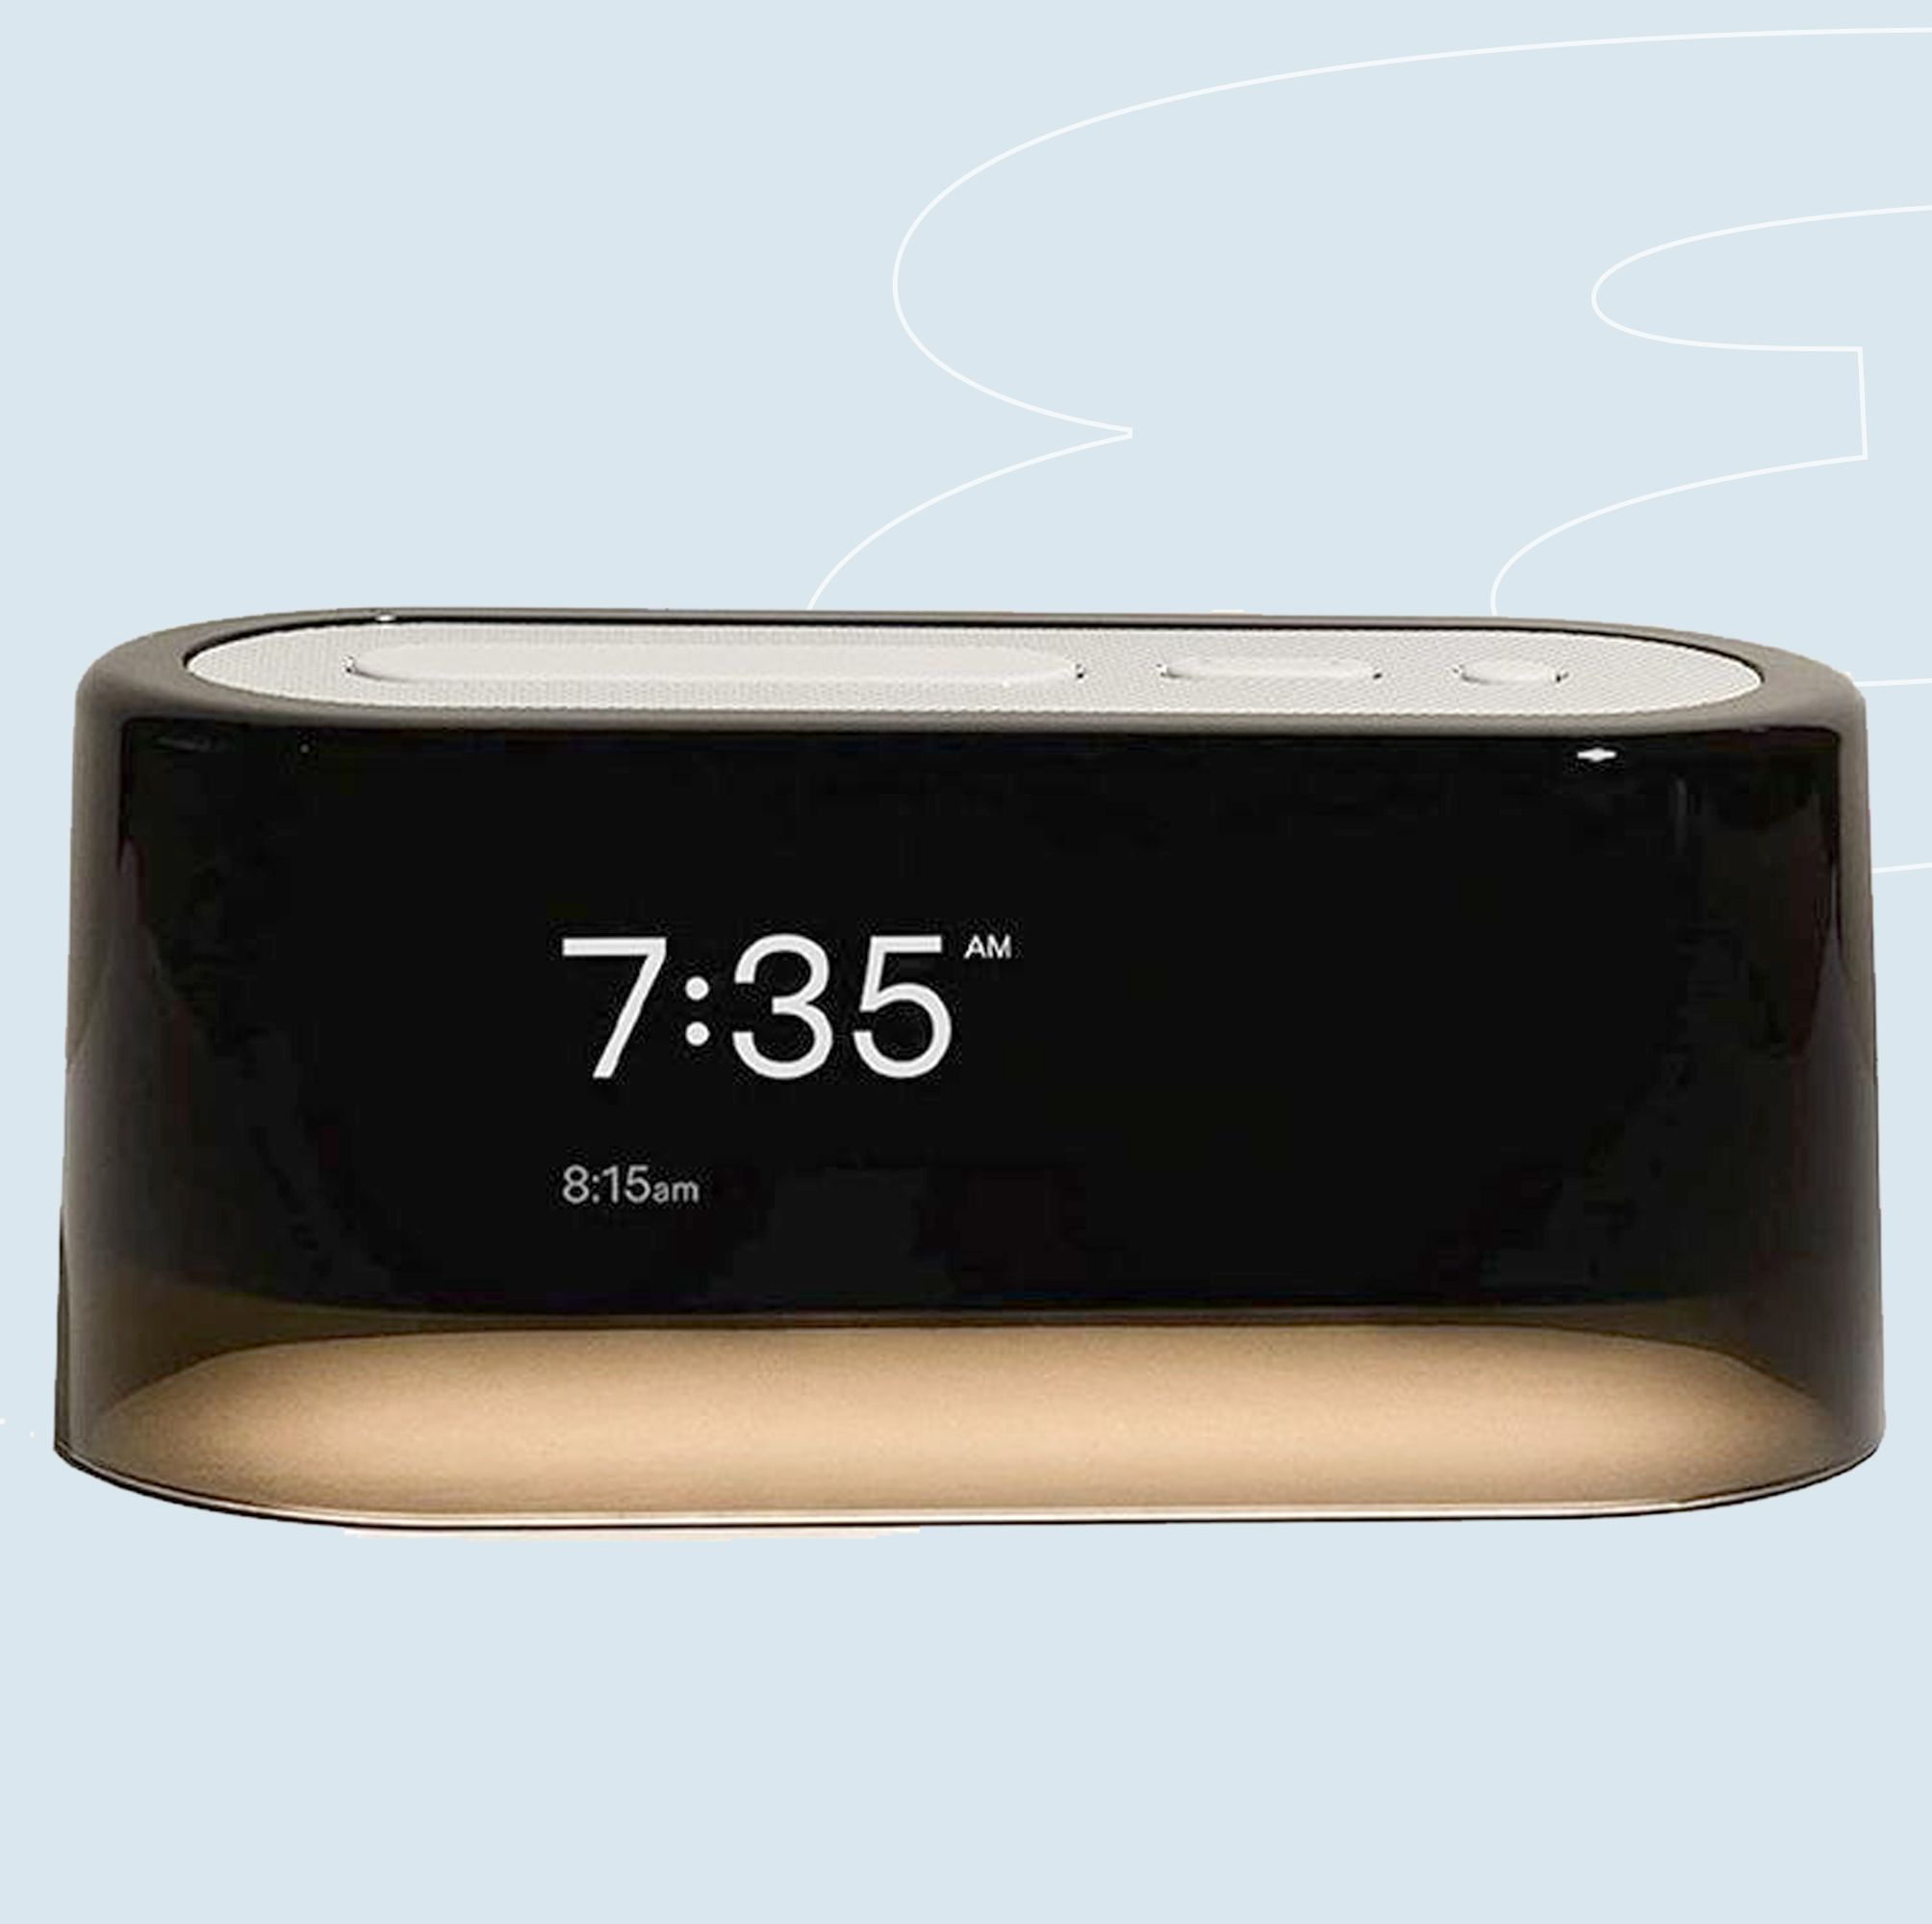 10 Smart Home Devices You Won't Want to Live Without